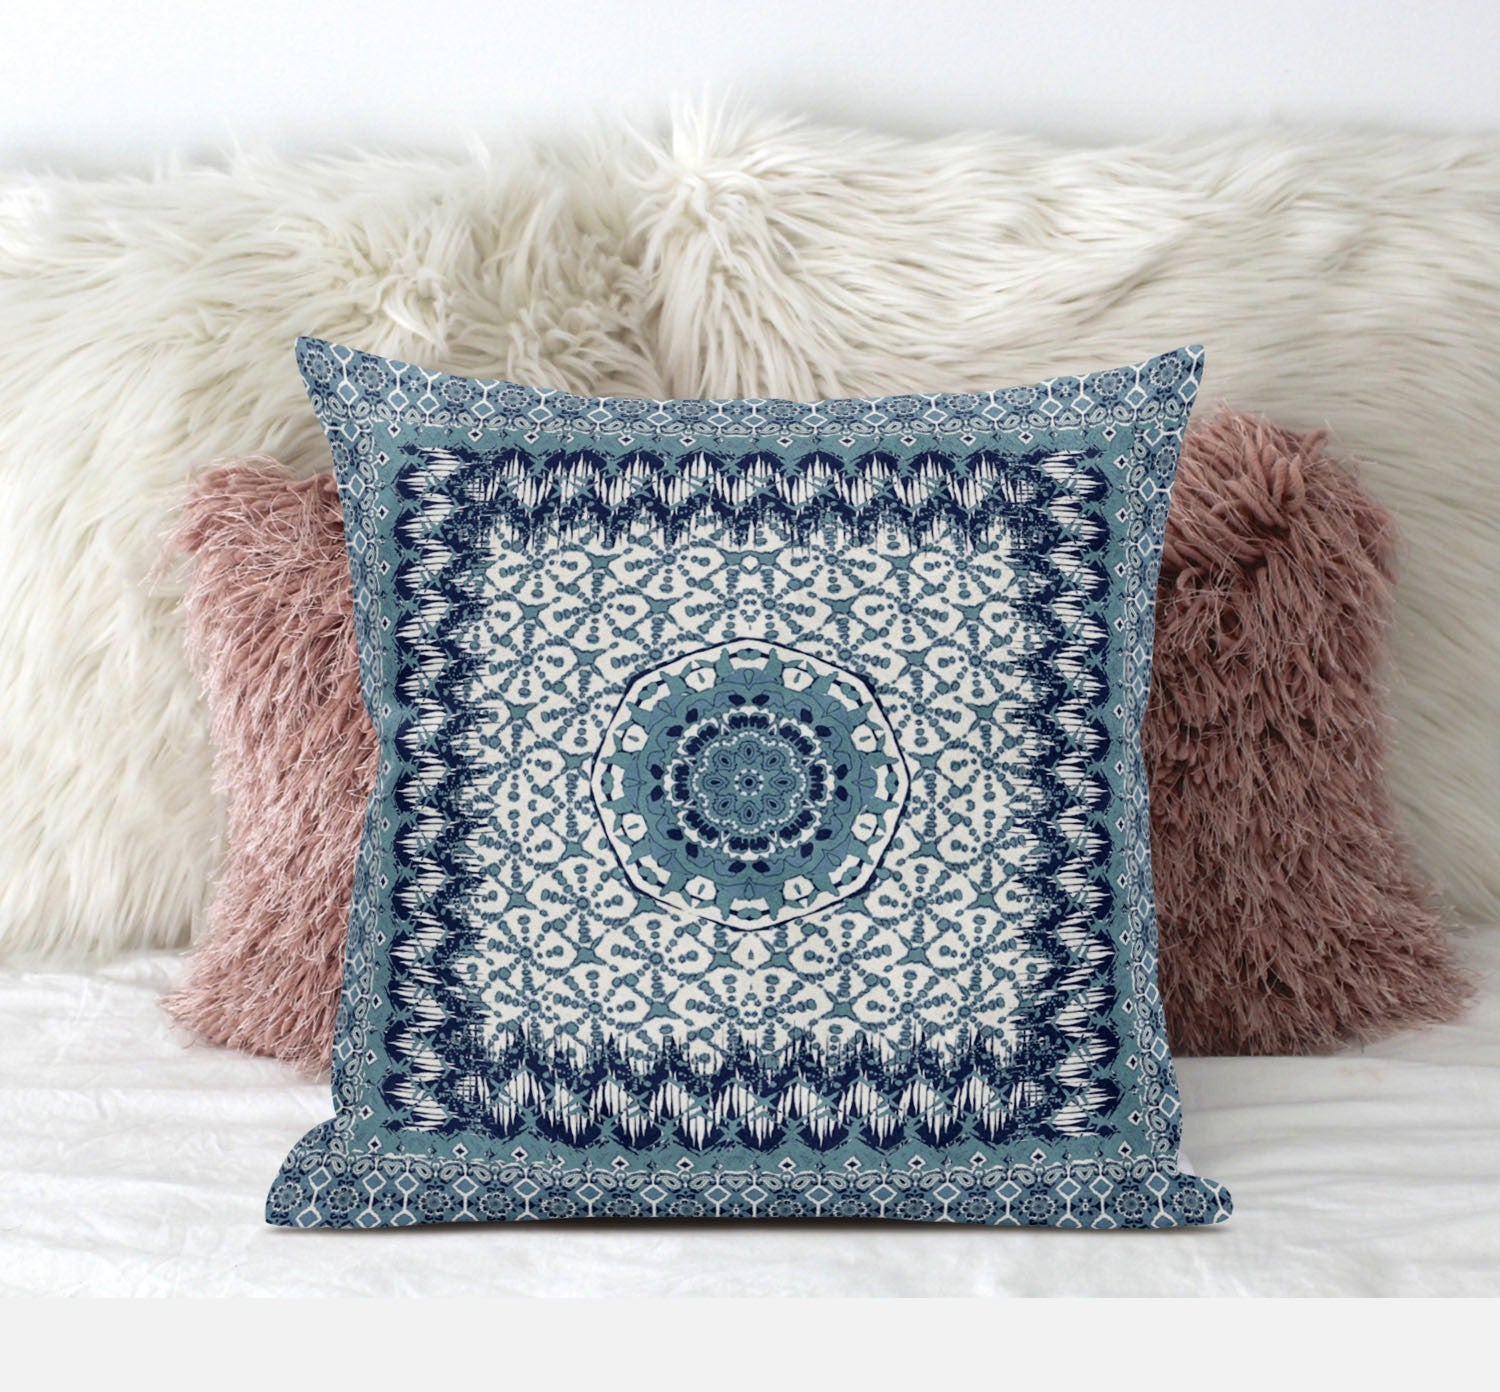 18” Blue White Holy Floral Suede Throw Pillow